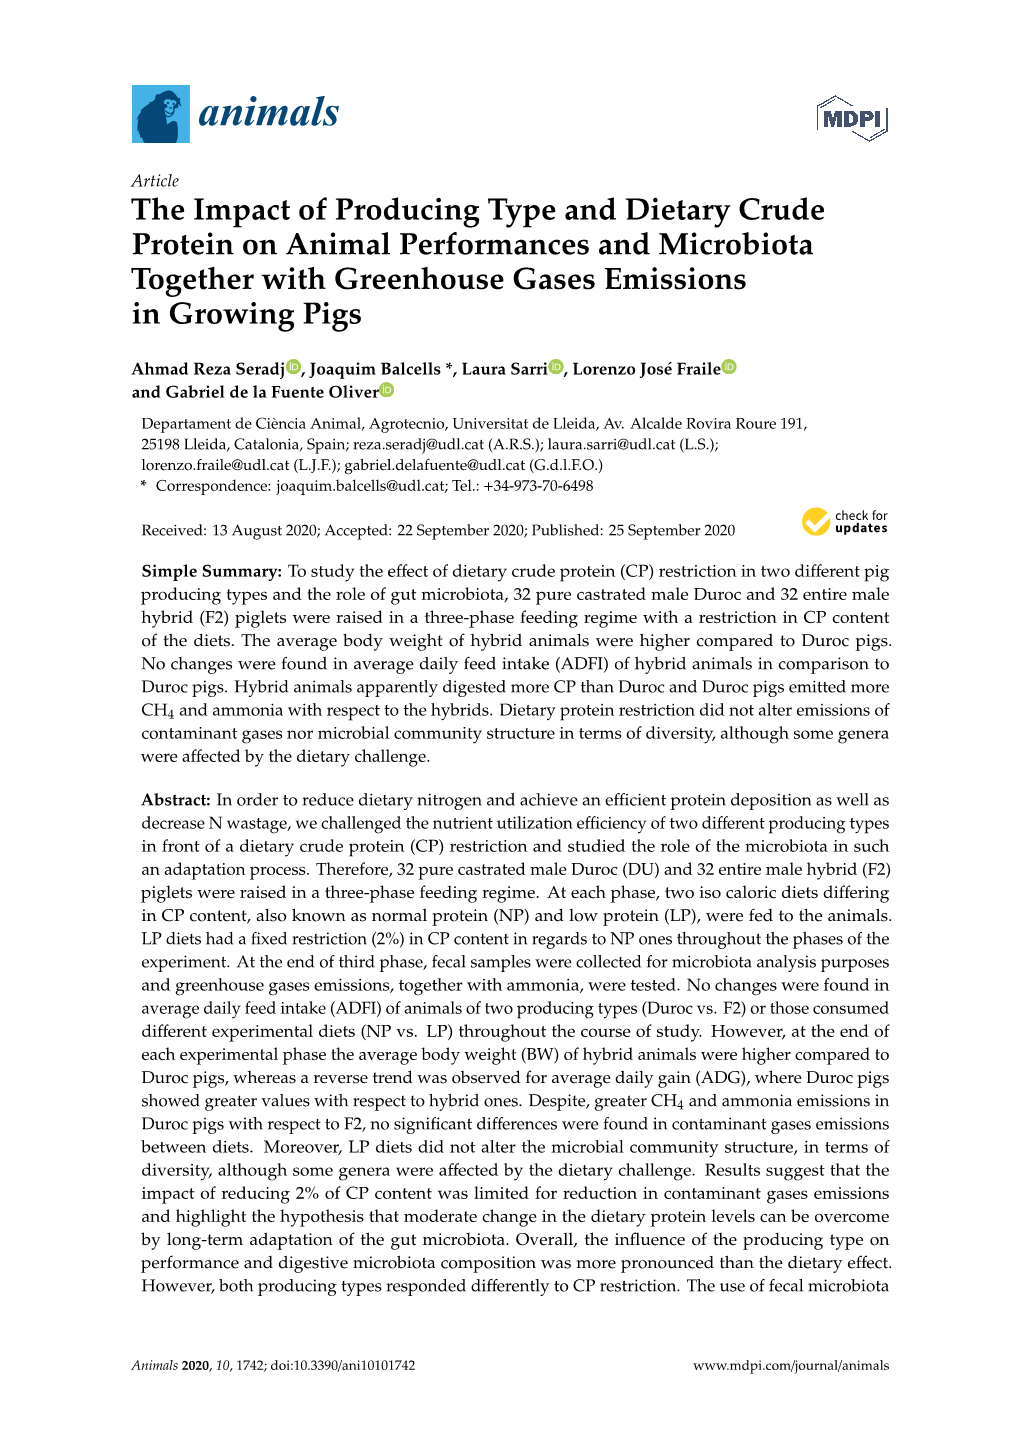 The Impact of Producing Type and Dietary Crude Protein on Animal Performances and Microbiota Together with Greenhouse Gases Emissions in Growing Pigs